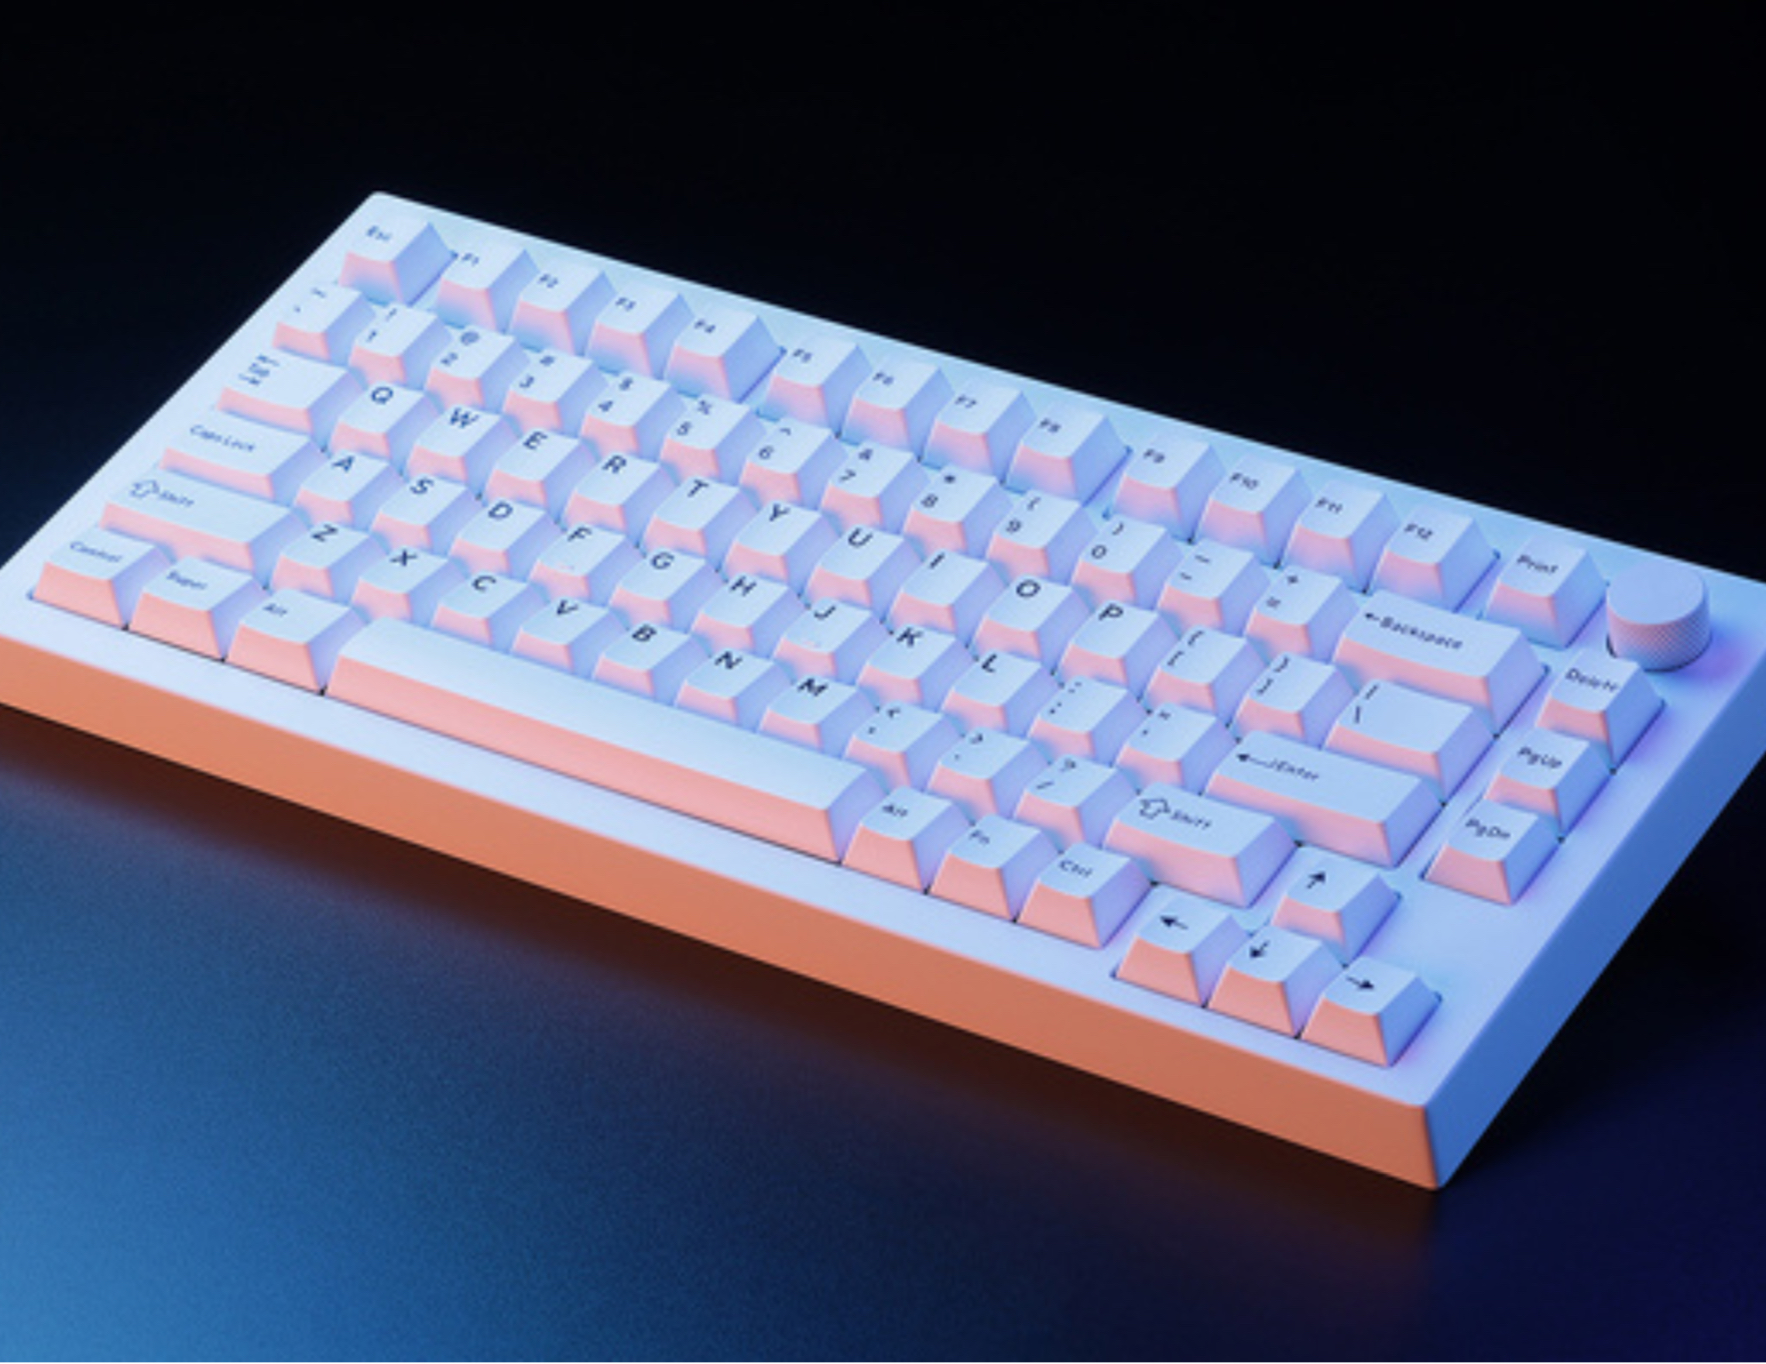 Drop launches the Sense75, its first new in-house keyboard since 2020